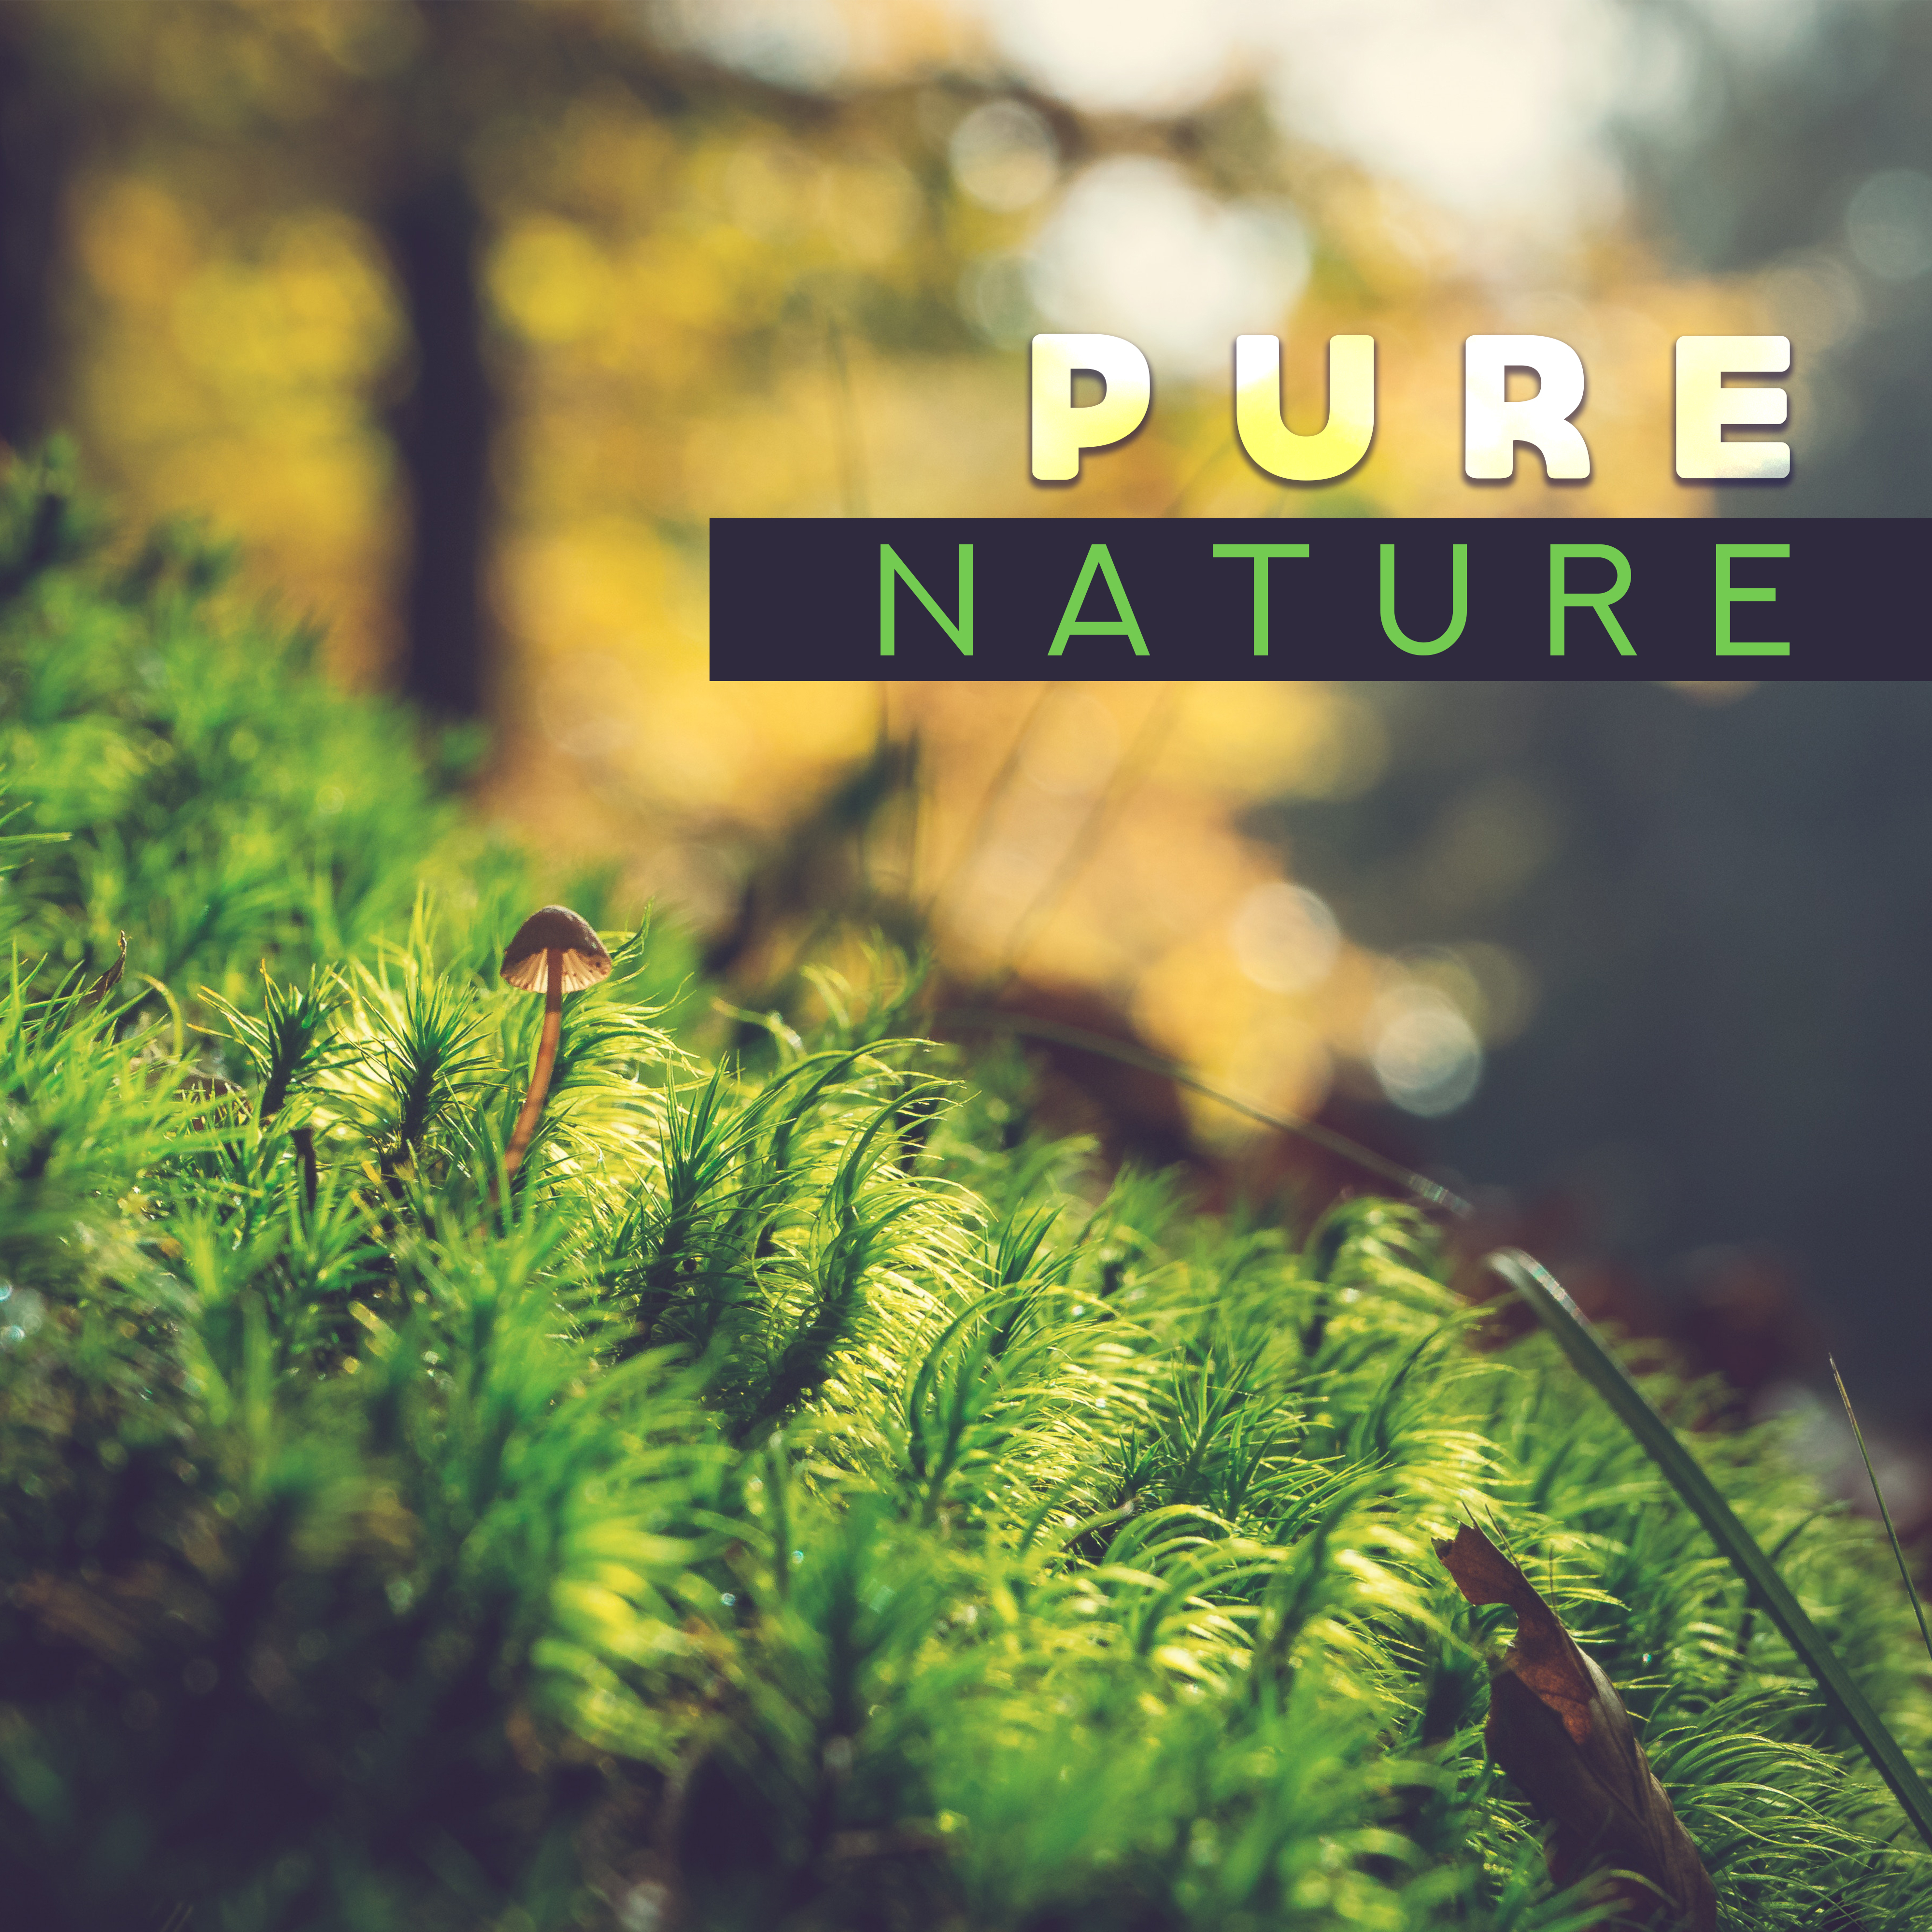 Pure Nature  Calming Nature Sounds Reduce Stress, Ambient Music, Inner Healing, Peaceful Songs to Relax